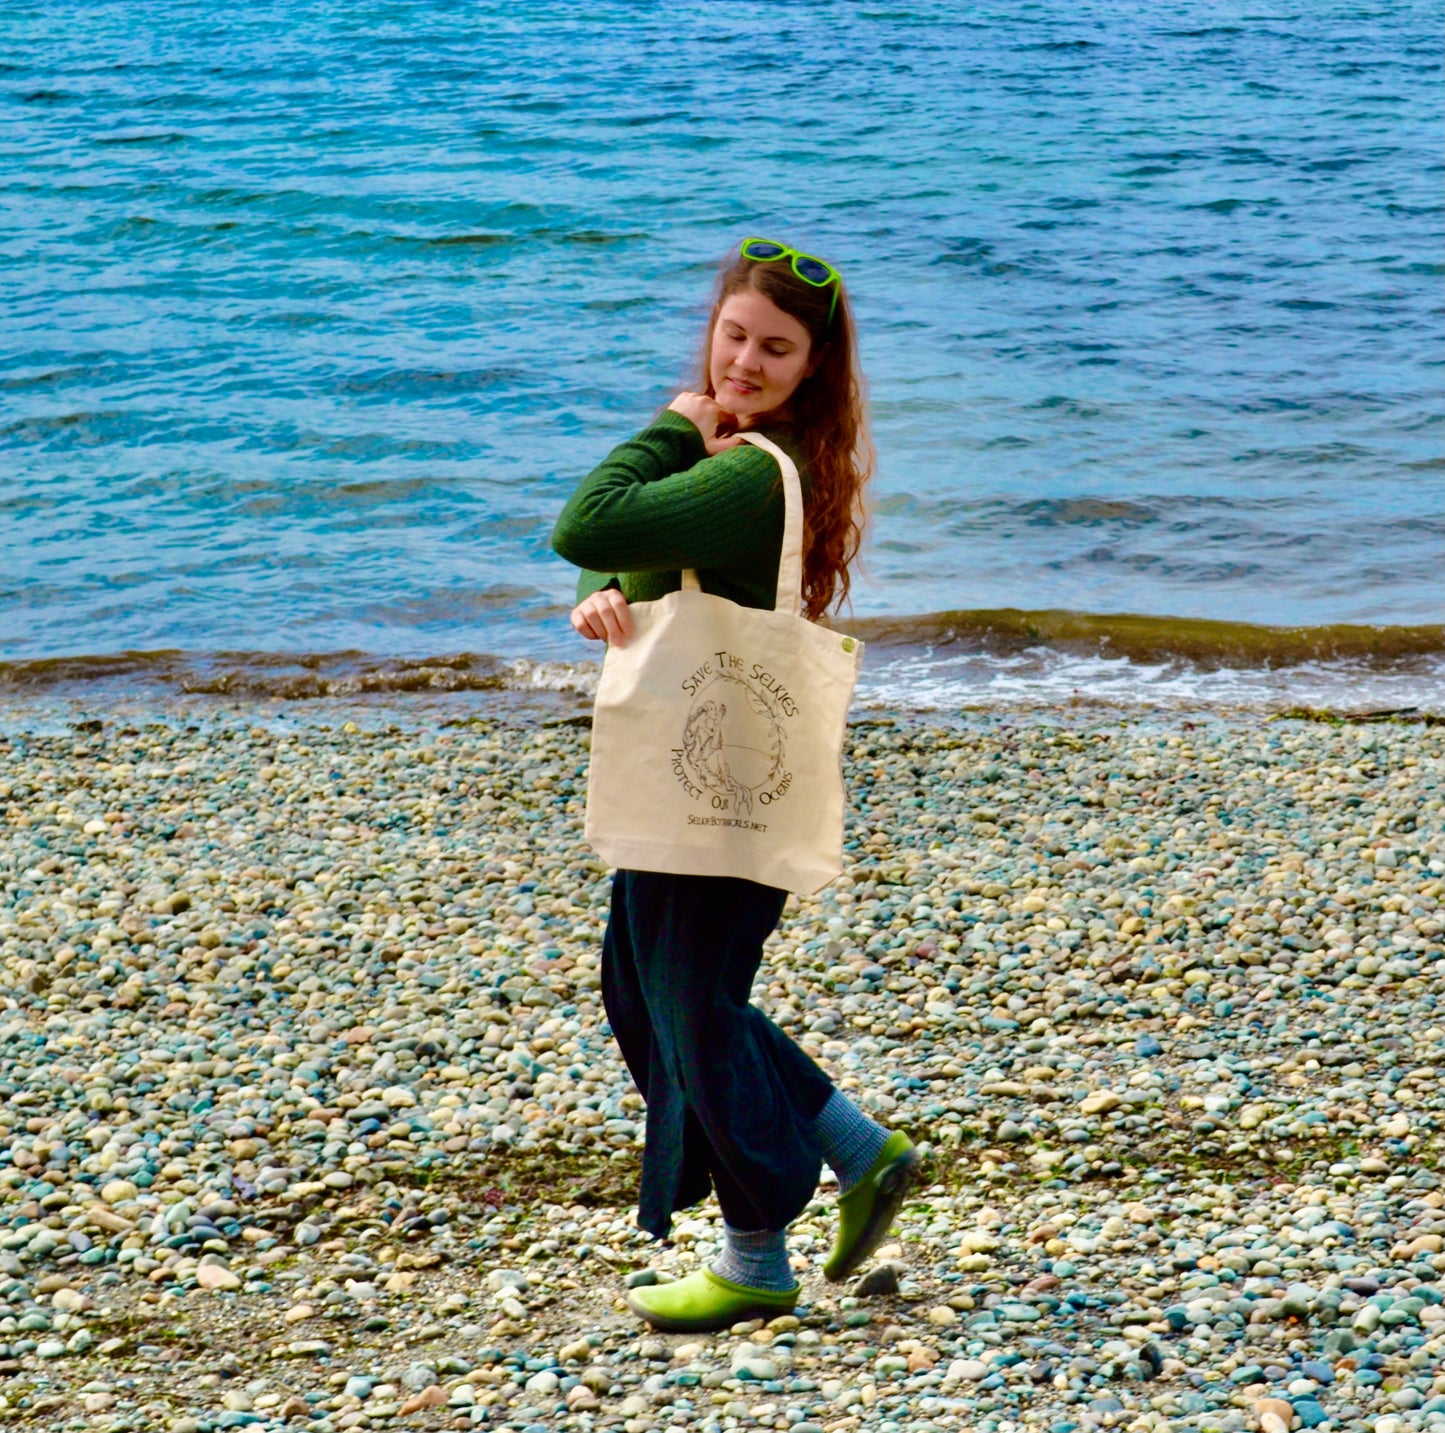 Save The Selkie's LARGE Tote Bag